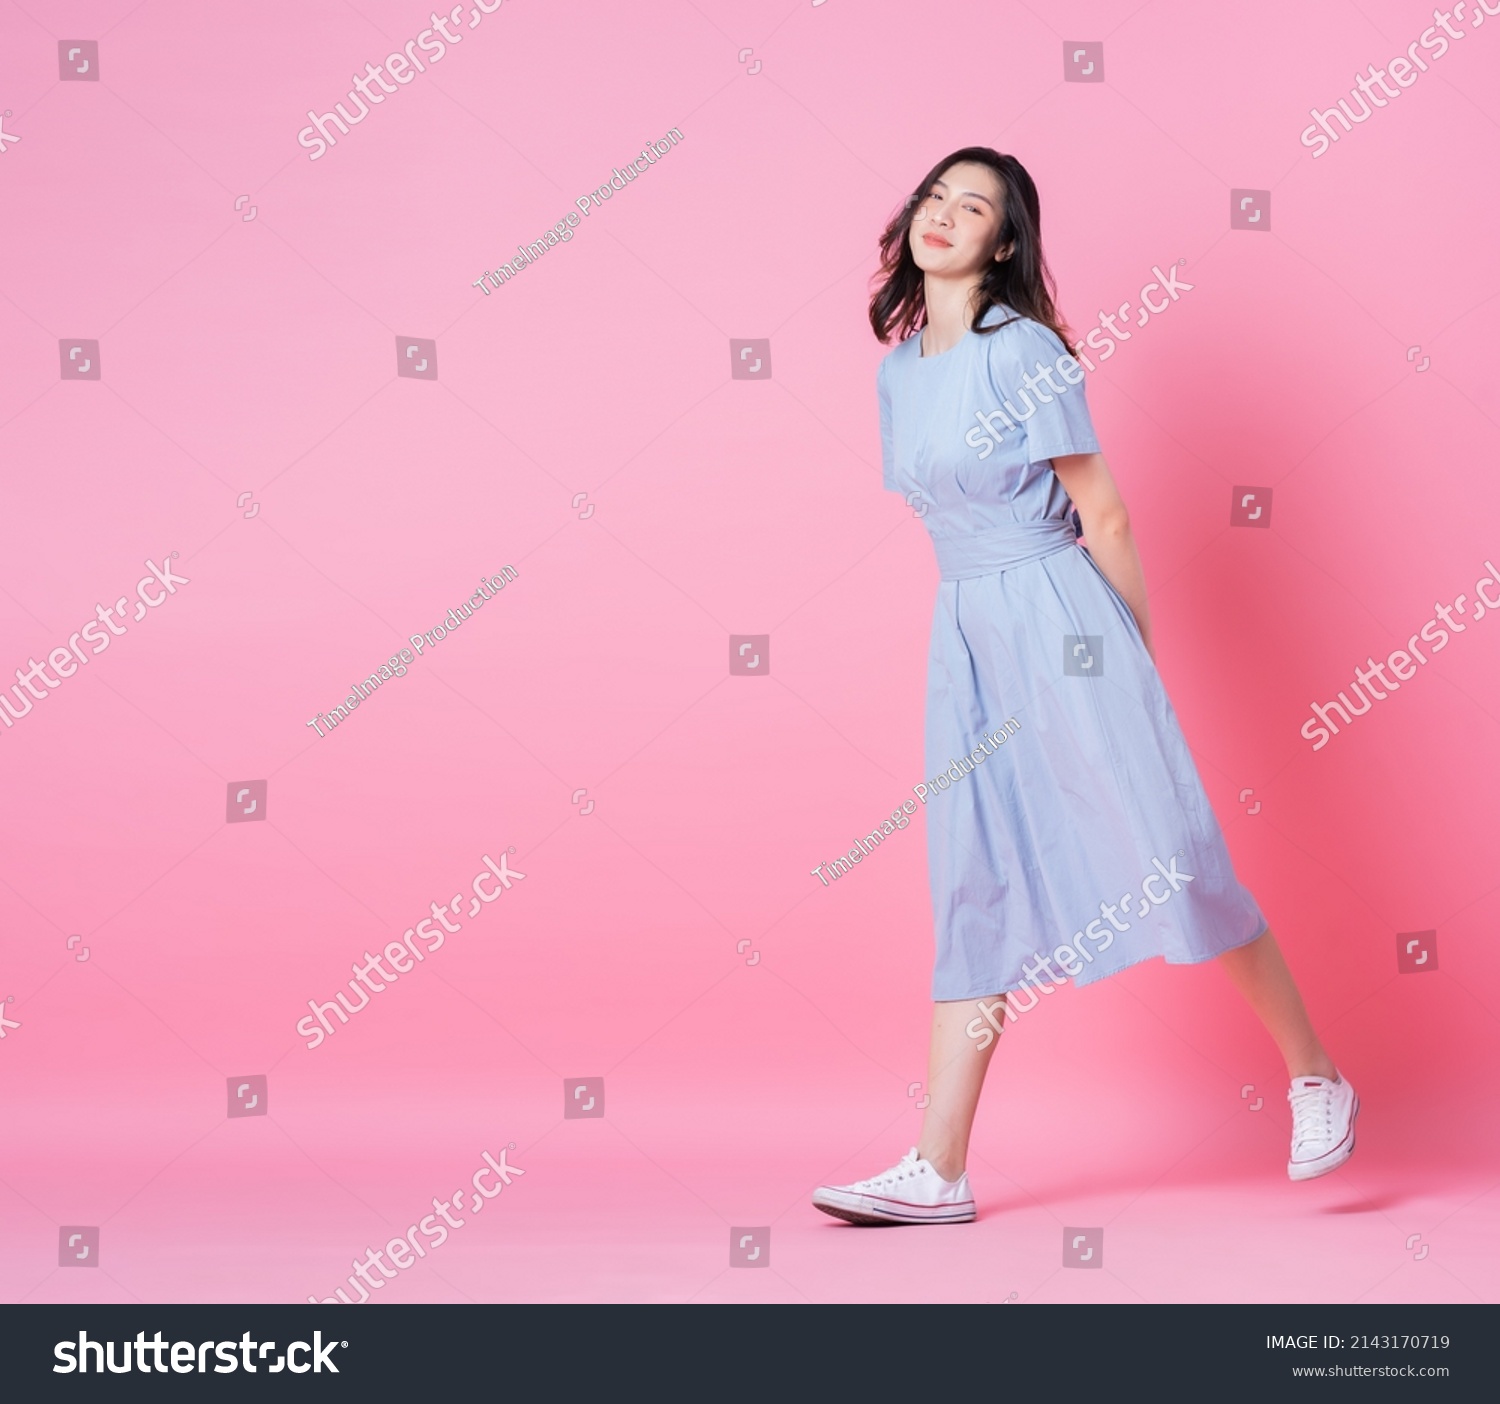 Full length image of young Asian woman wearing blue dress on pink background #2143170719